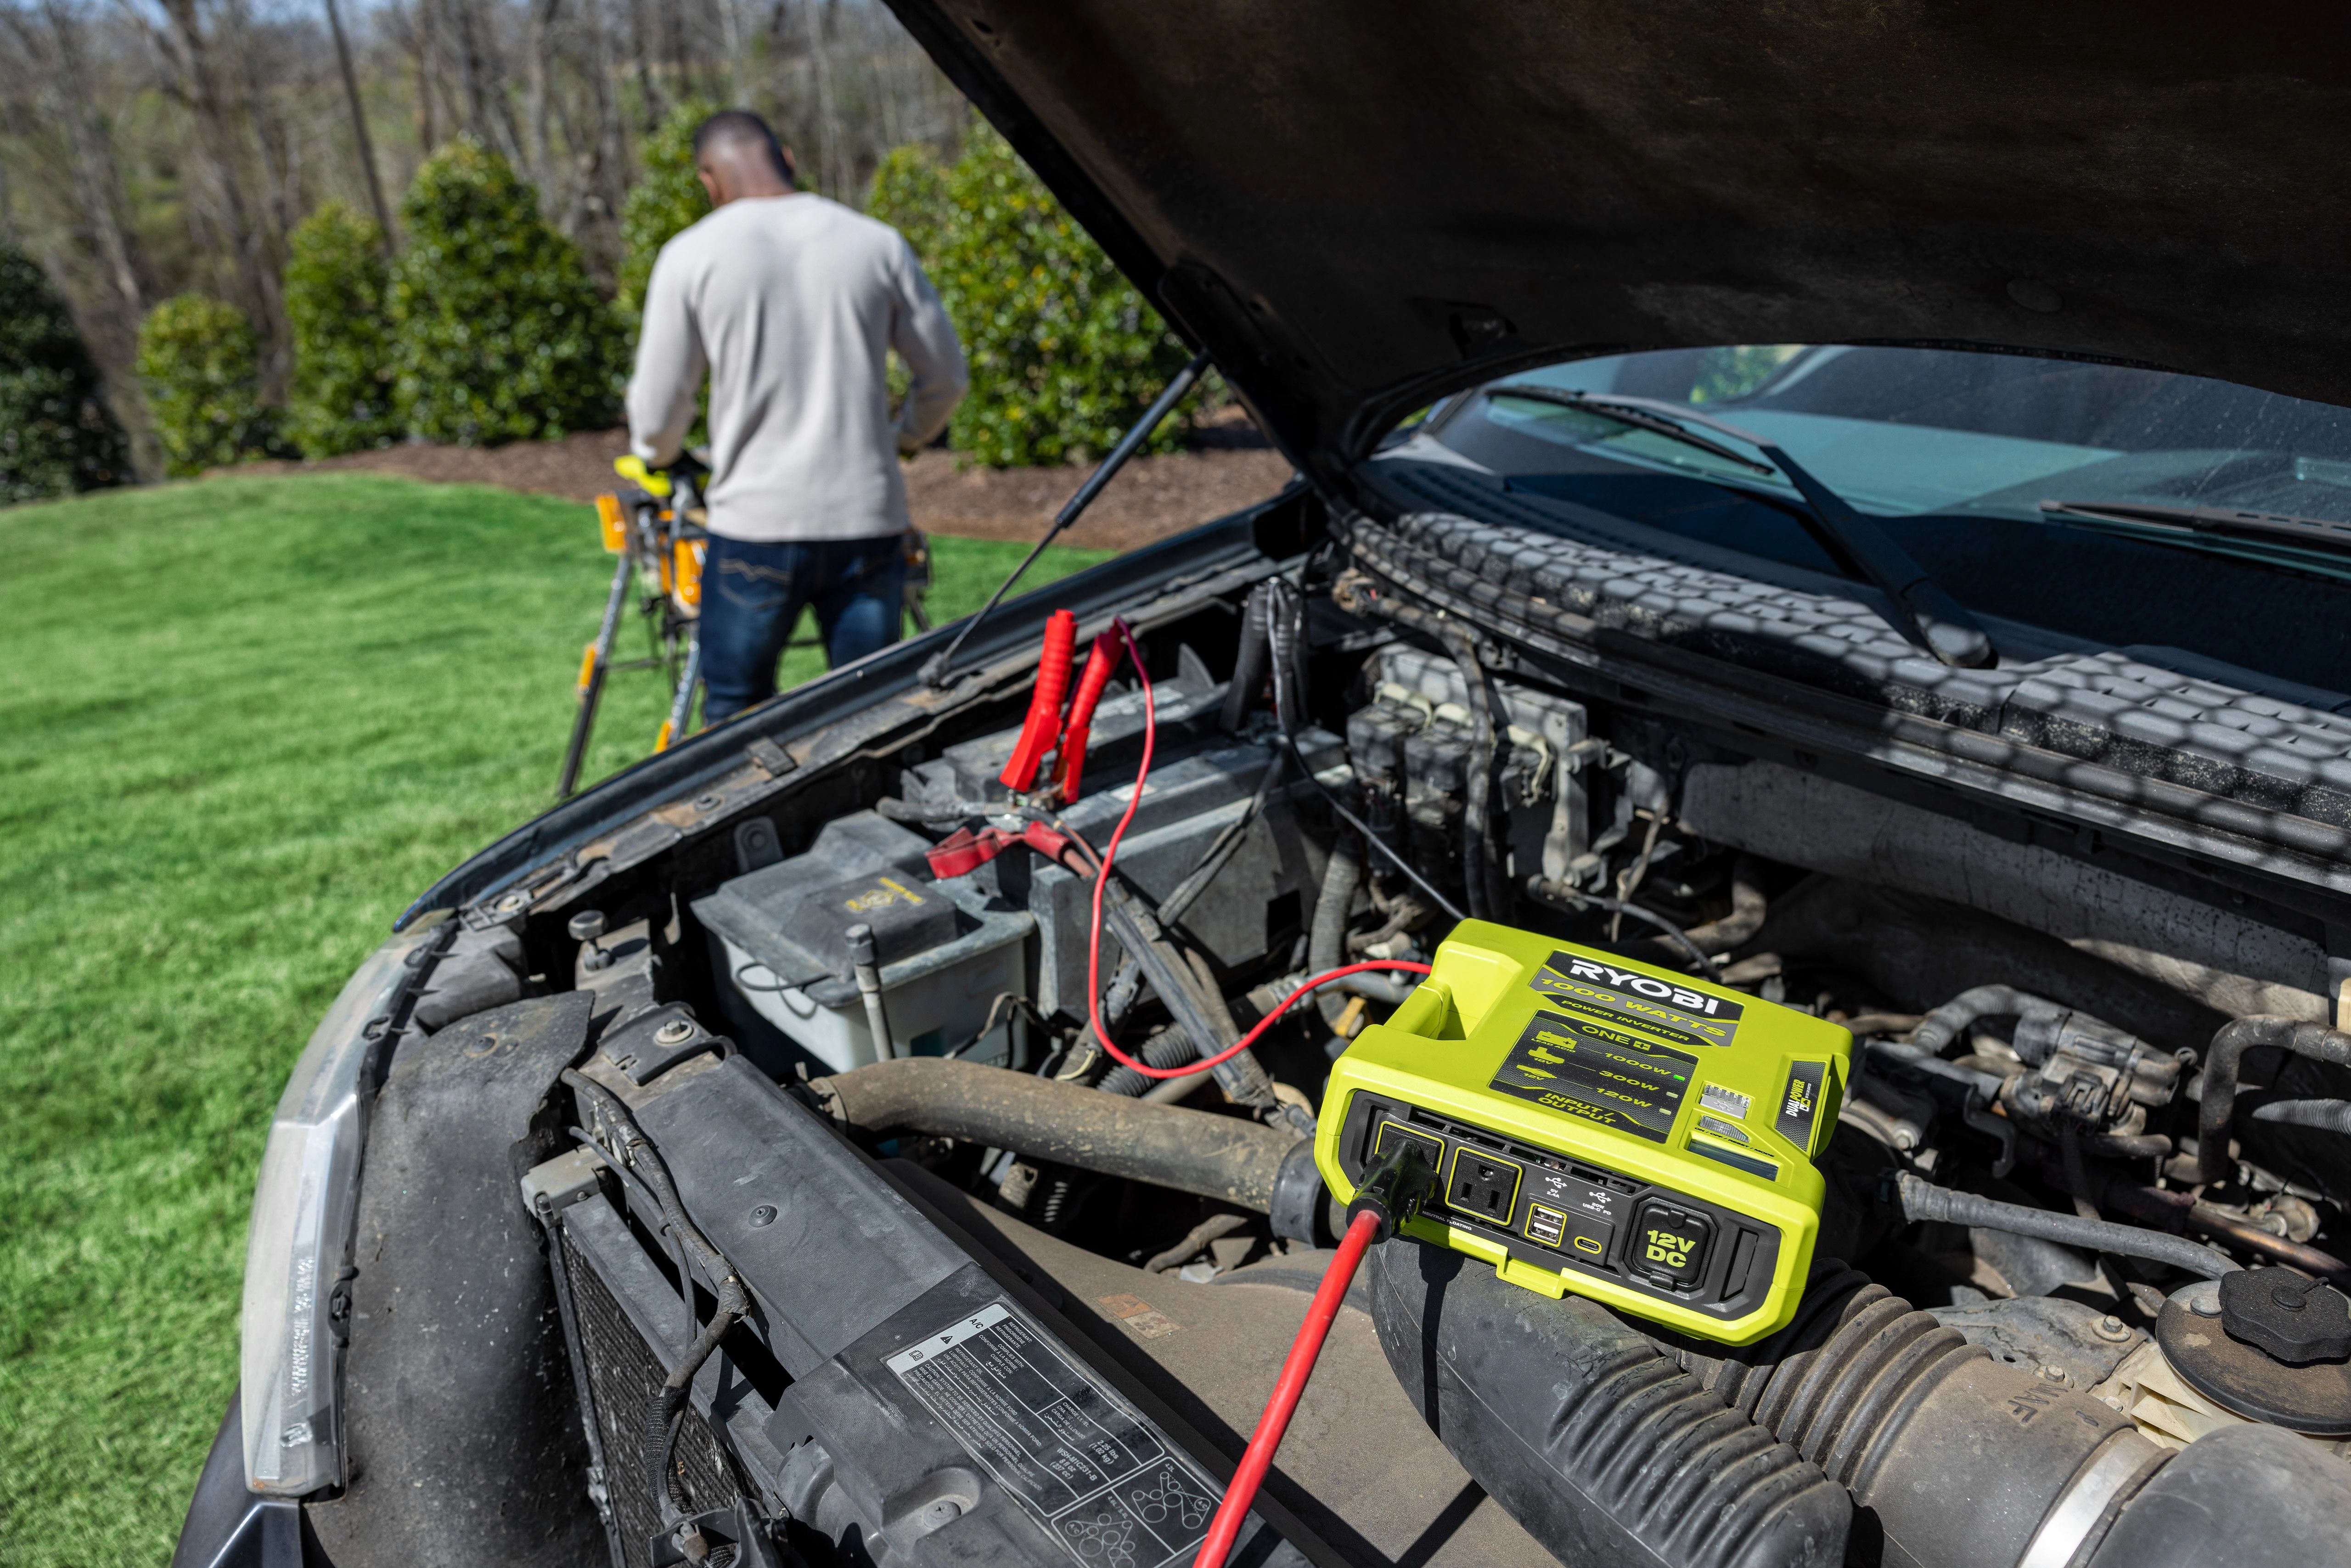 Power By Connecting Directly to a Car Battery